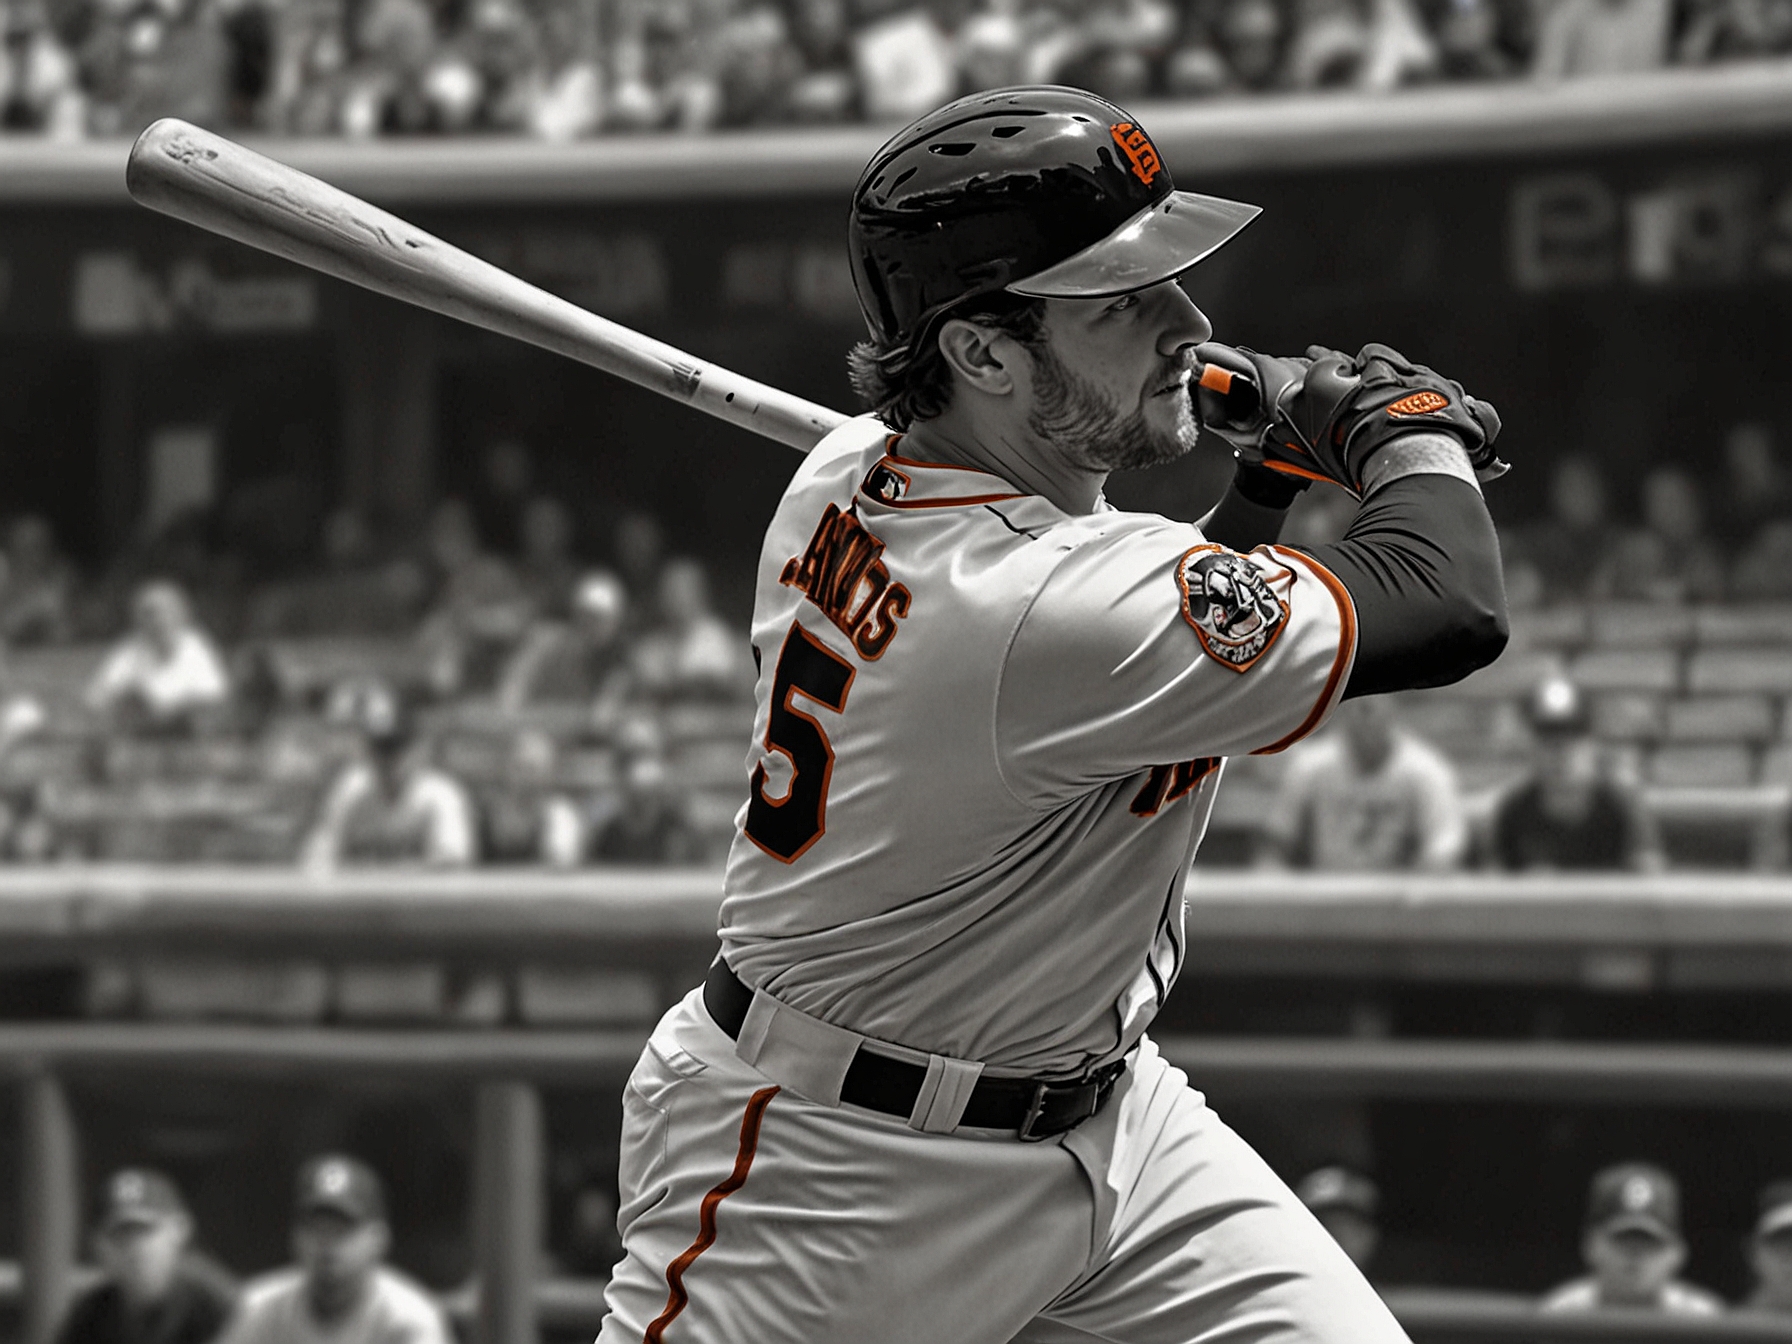 Brett Wisely of the San Francisco Giants hitting a powerful two-run homer in the bottom of the ninth inning against the Los Angeles Dodgers, securing a thrilling 5-3 victory.